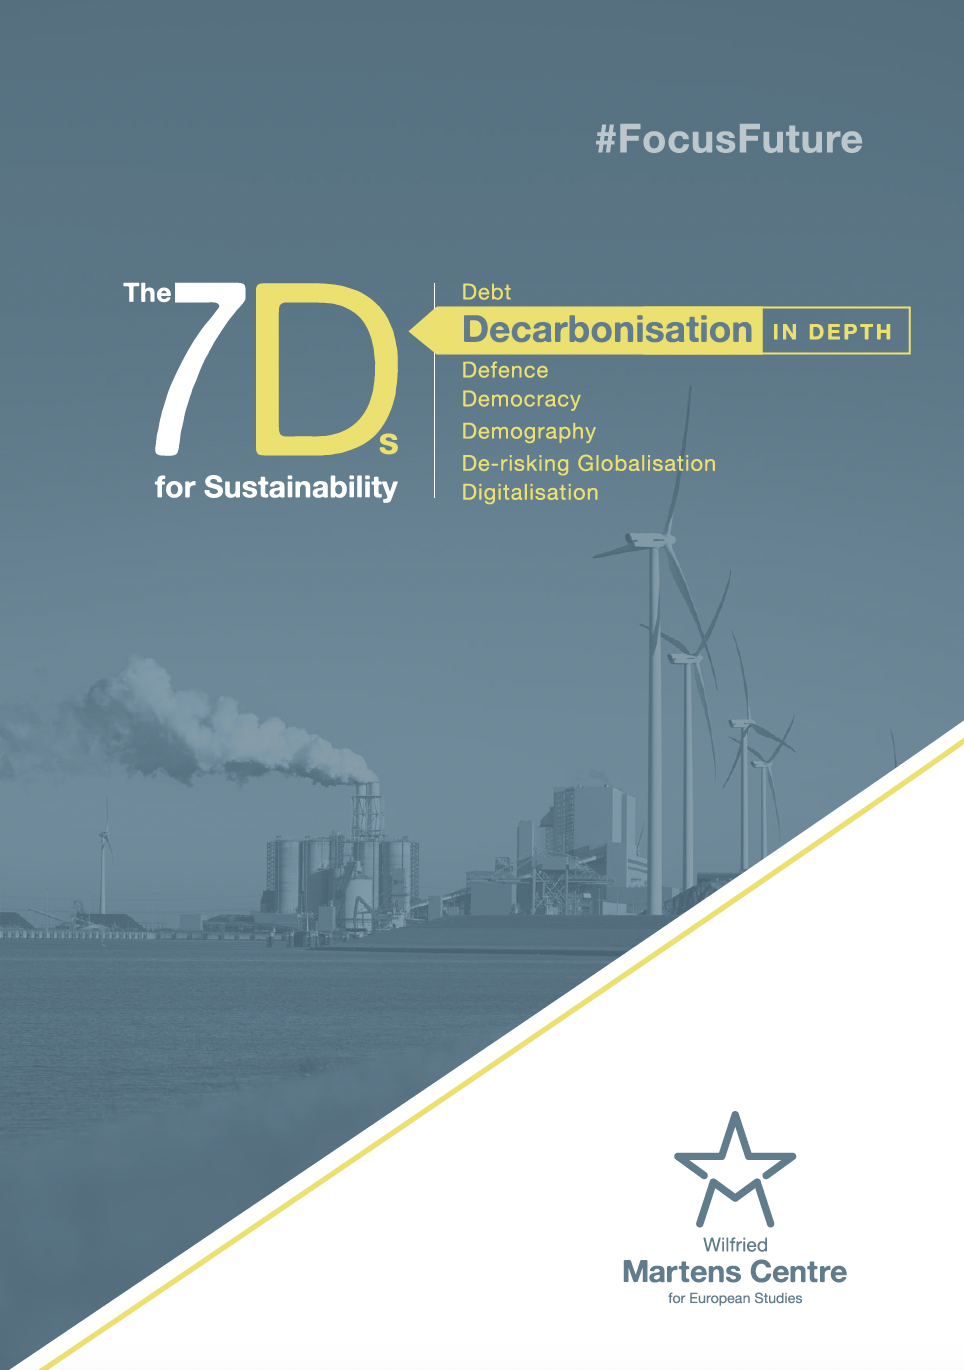 The 7Ds - Decarbonisation in Depth